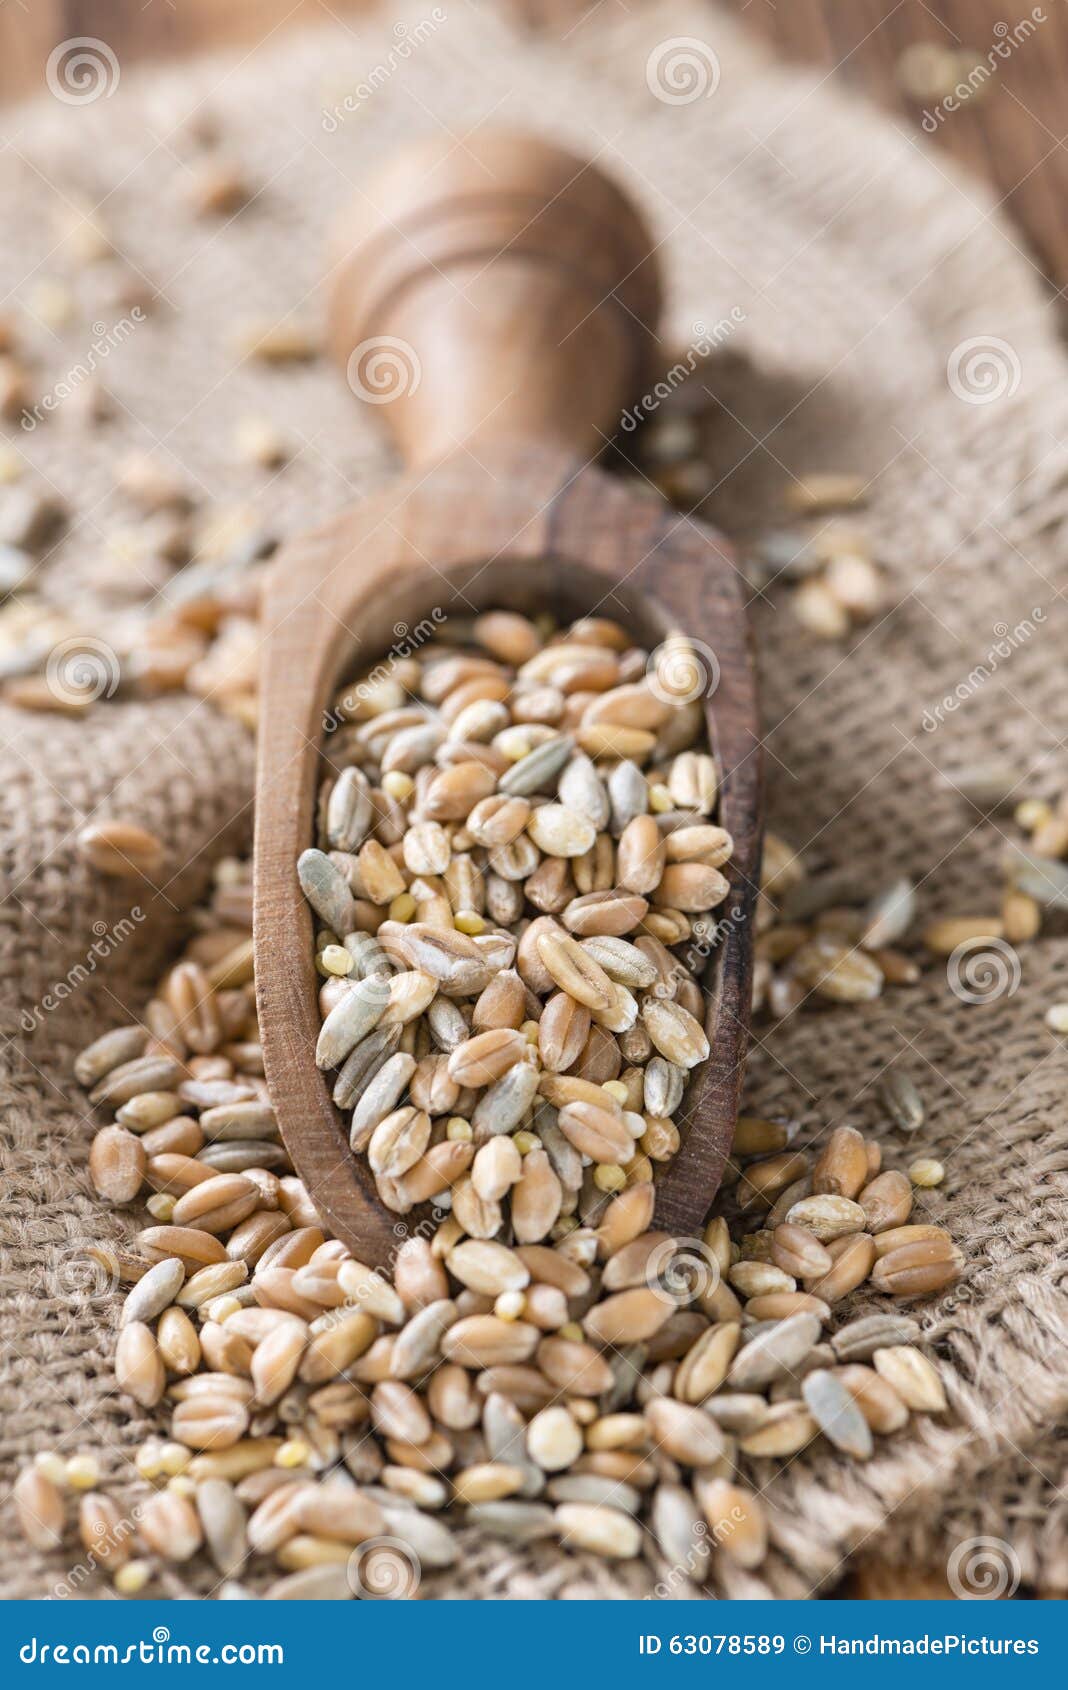 Cereals (wheat, Rye, Barley, Oat And Millet) Stock Image ...